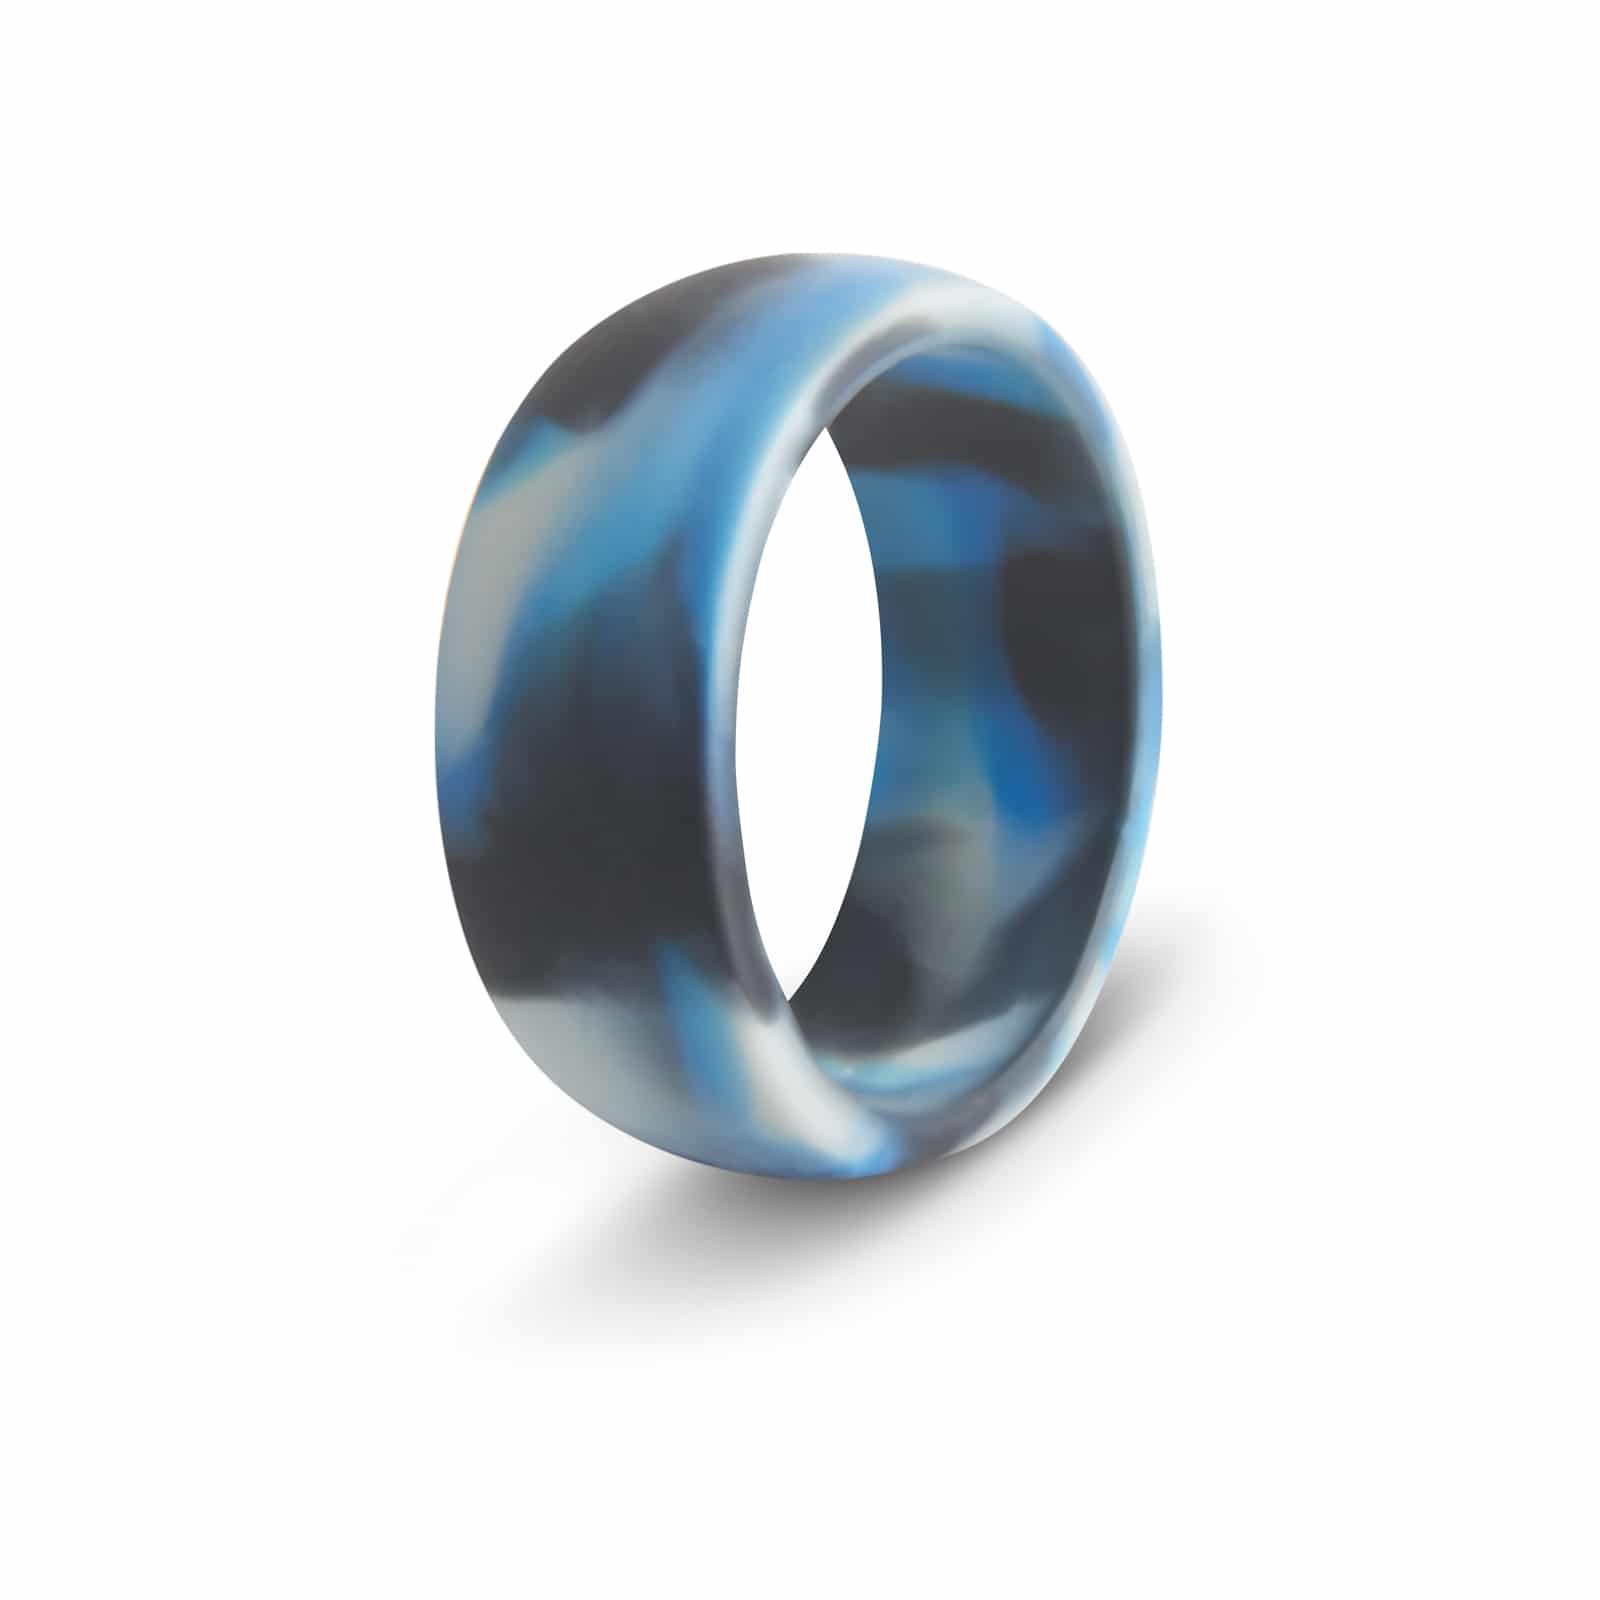 products/Botthms-Ring-_Botthms-ring-Blue-blac-Camo-1.jpg